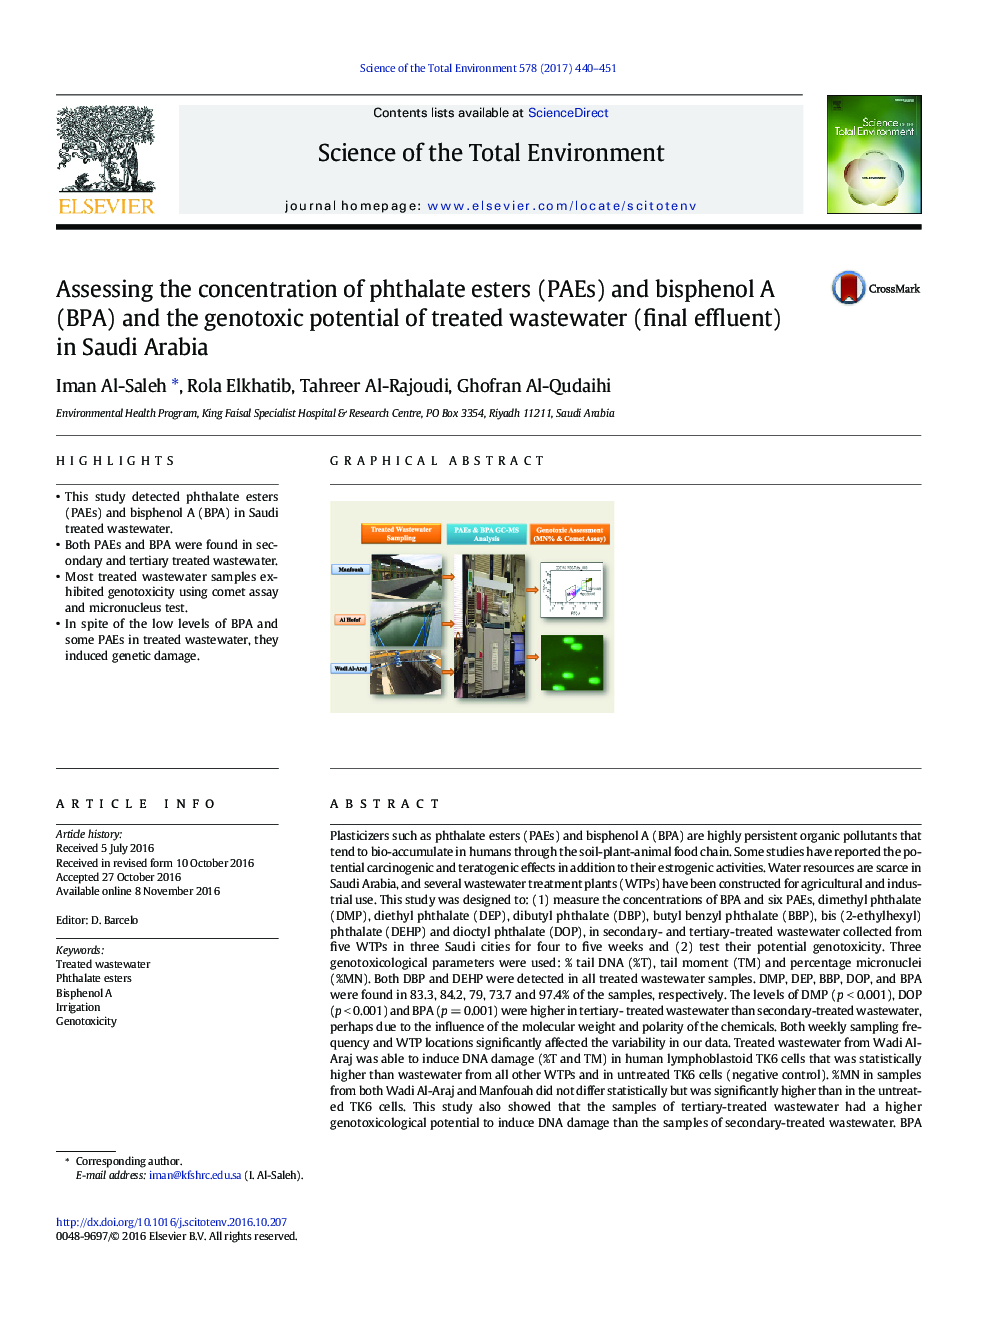 Assessing the concentration of phthalate esters (PAEs) and bisphenol A (BPA) and the genotoxic potential of treated wastewater (final effluent) in Saudi Arabia